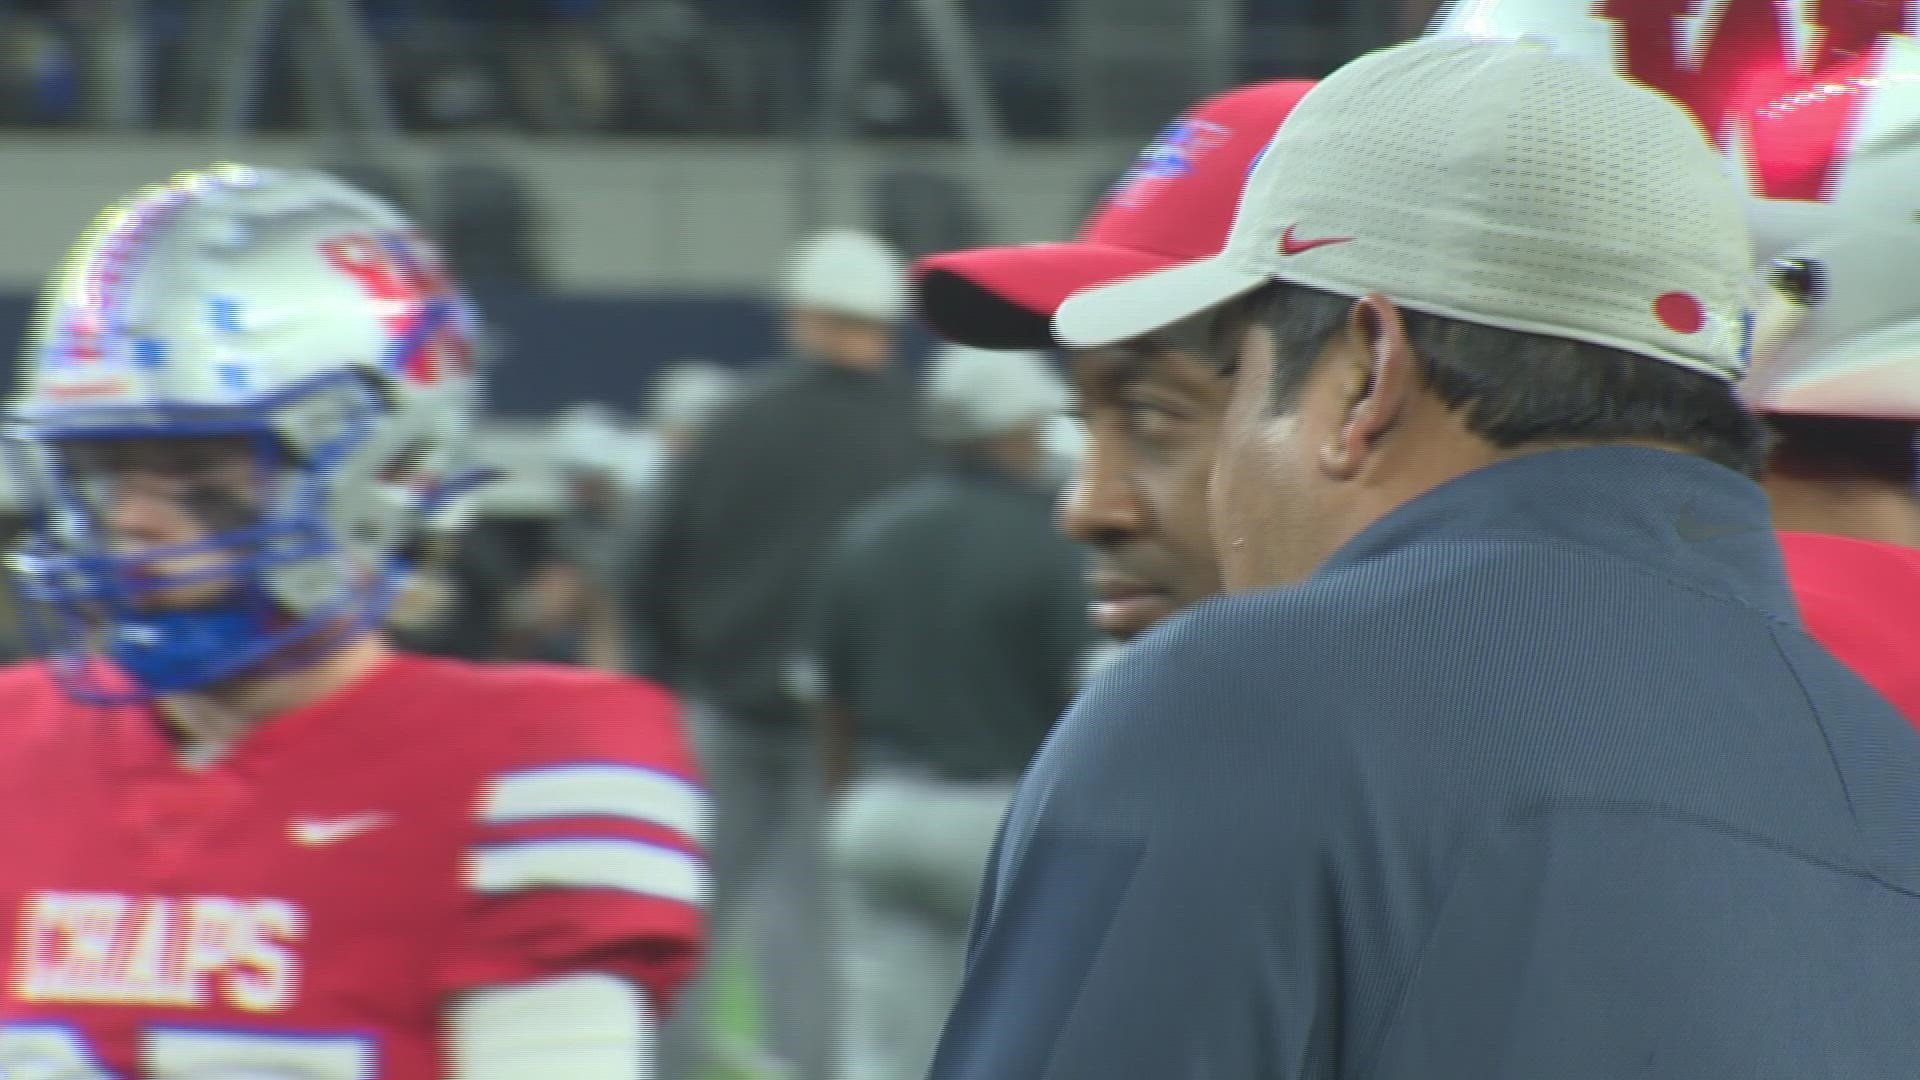 Salazar served as the defensive coordinator for the Chaps from 2014 to 2021.